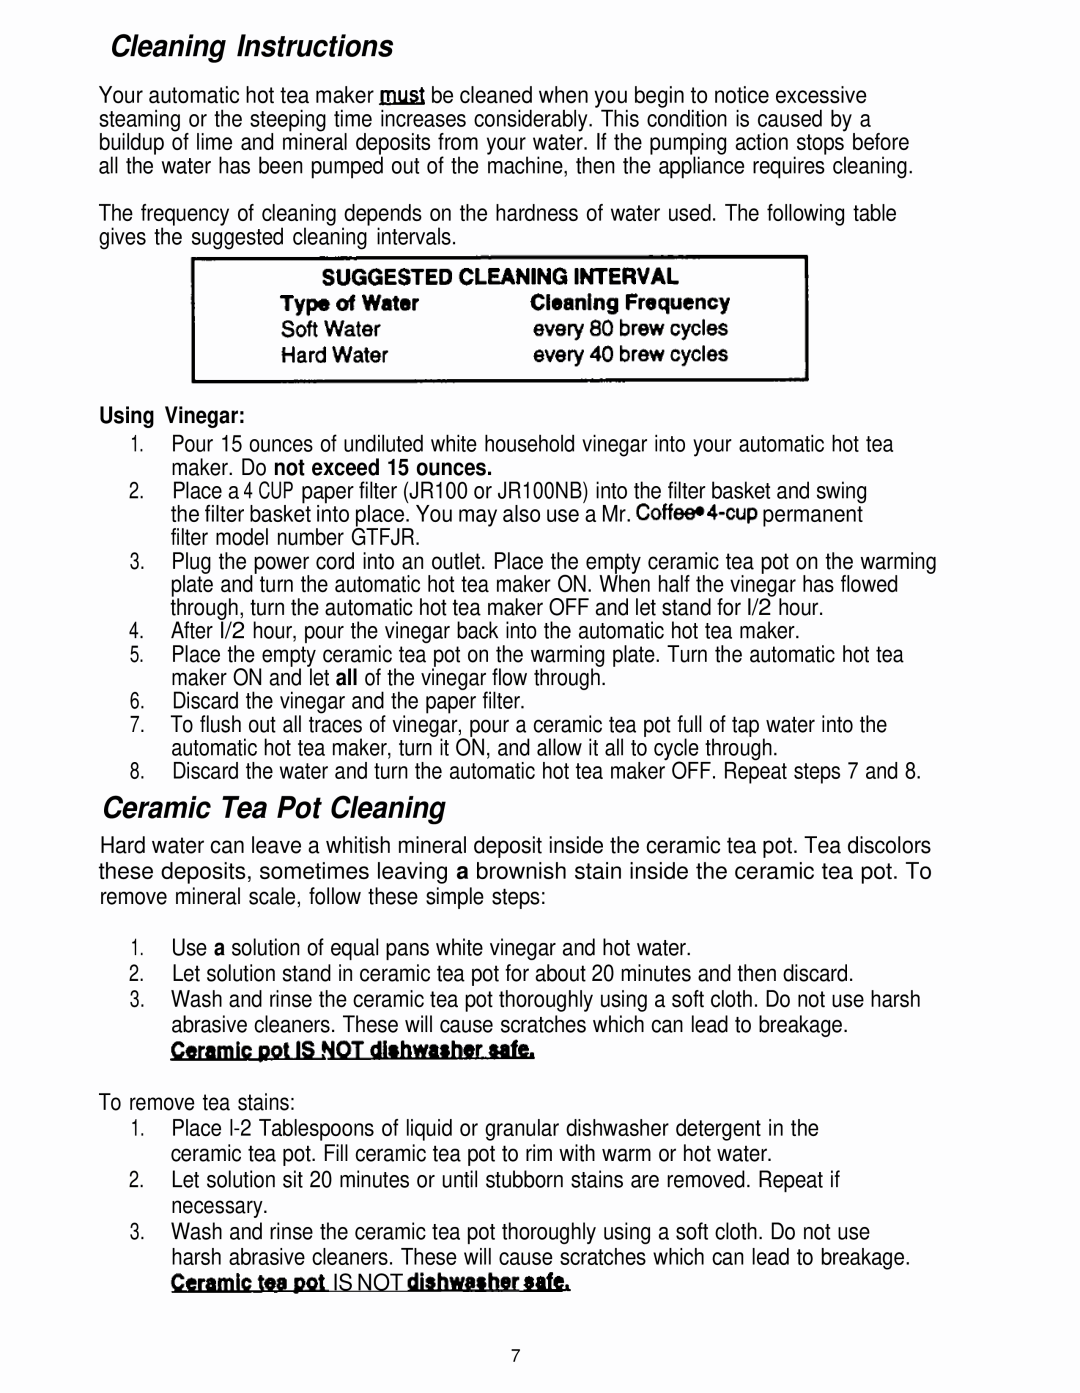 Sunbeam HTM11 operating instructions Cleaning Instructions, Ceramic Tea Pot Cleaning, Using Vinegar 